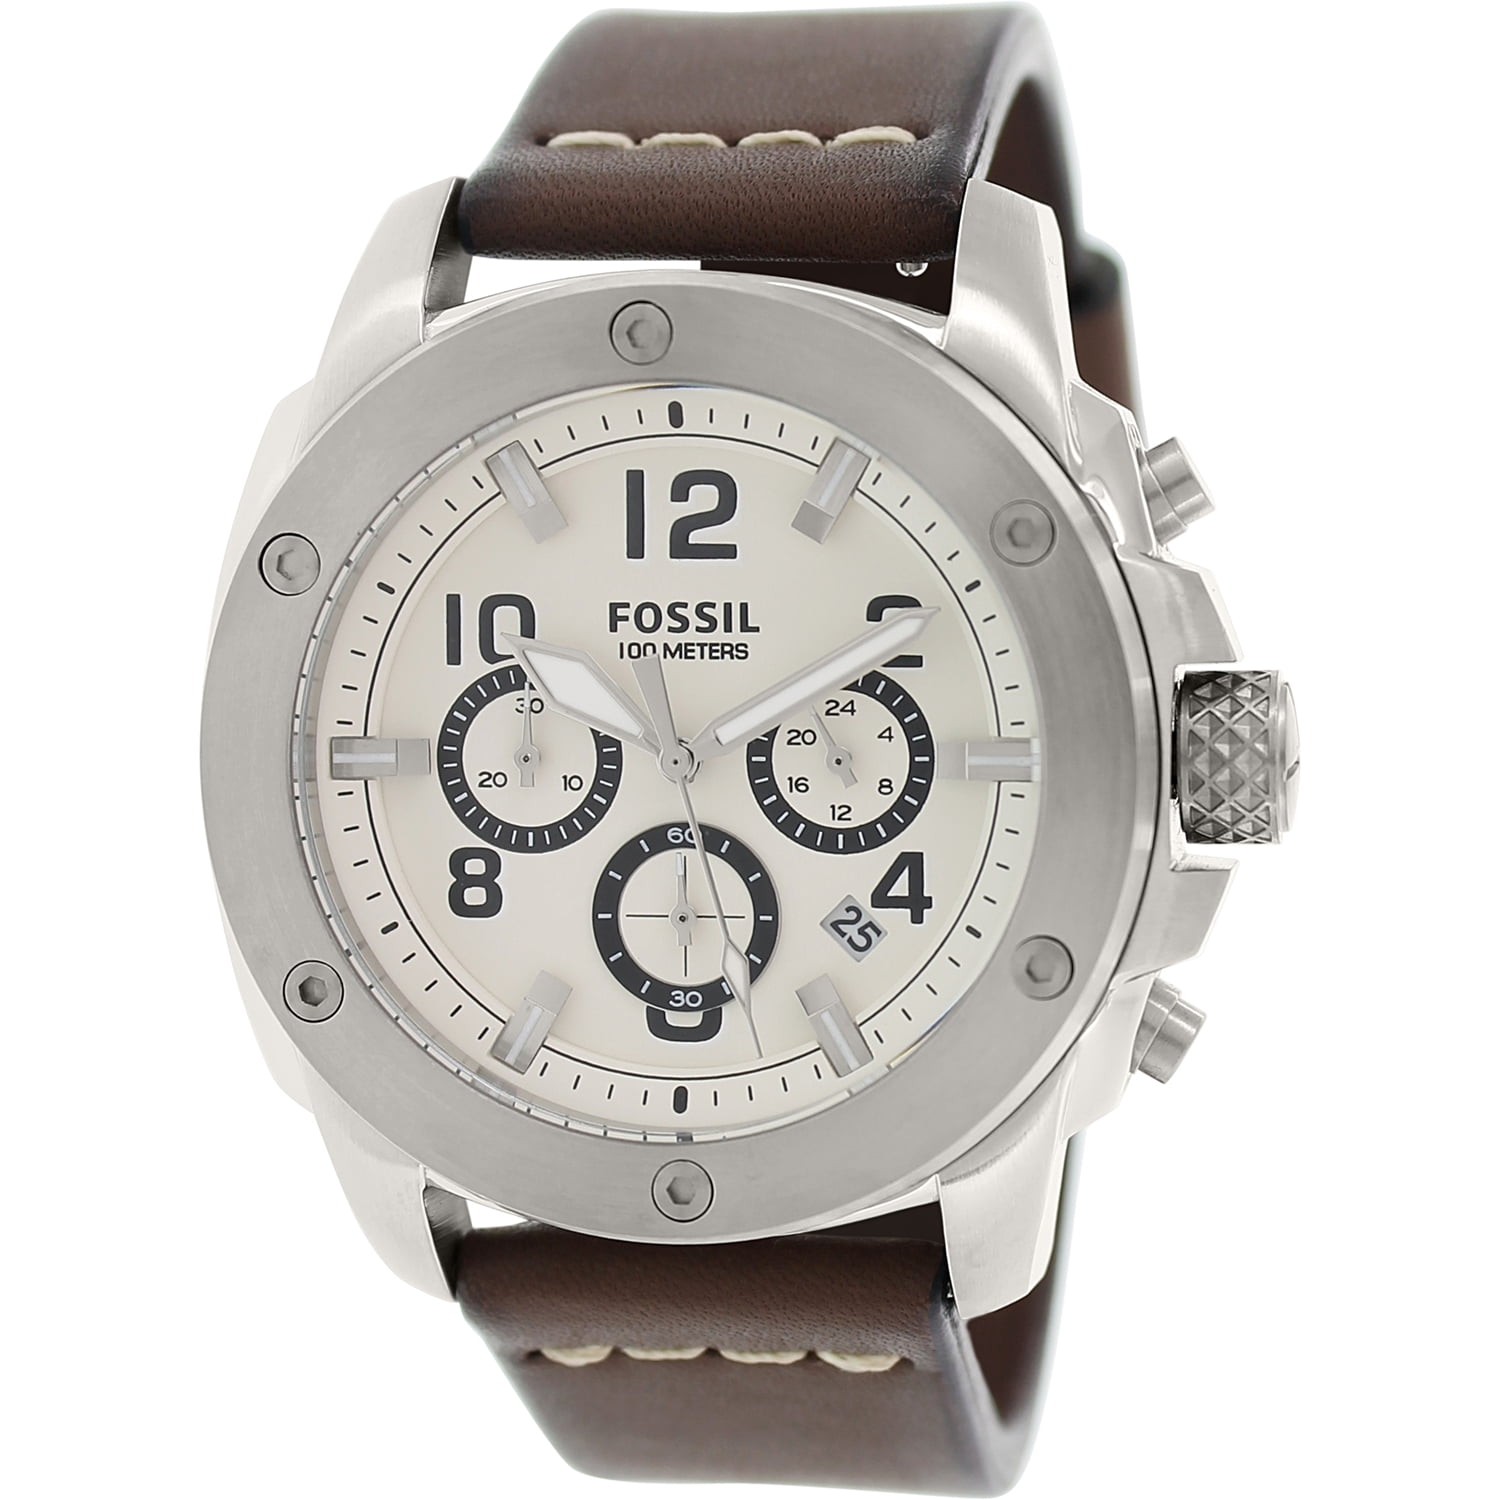 Fossil - Fossil Men's Machine Chronograph Leather Strap Watch FS4929 ...